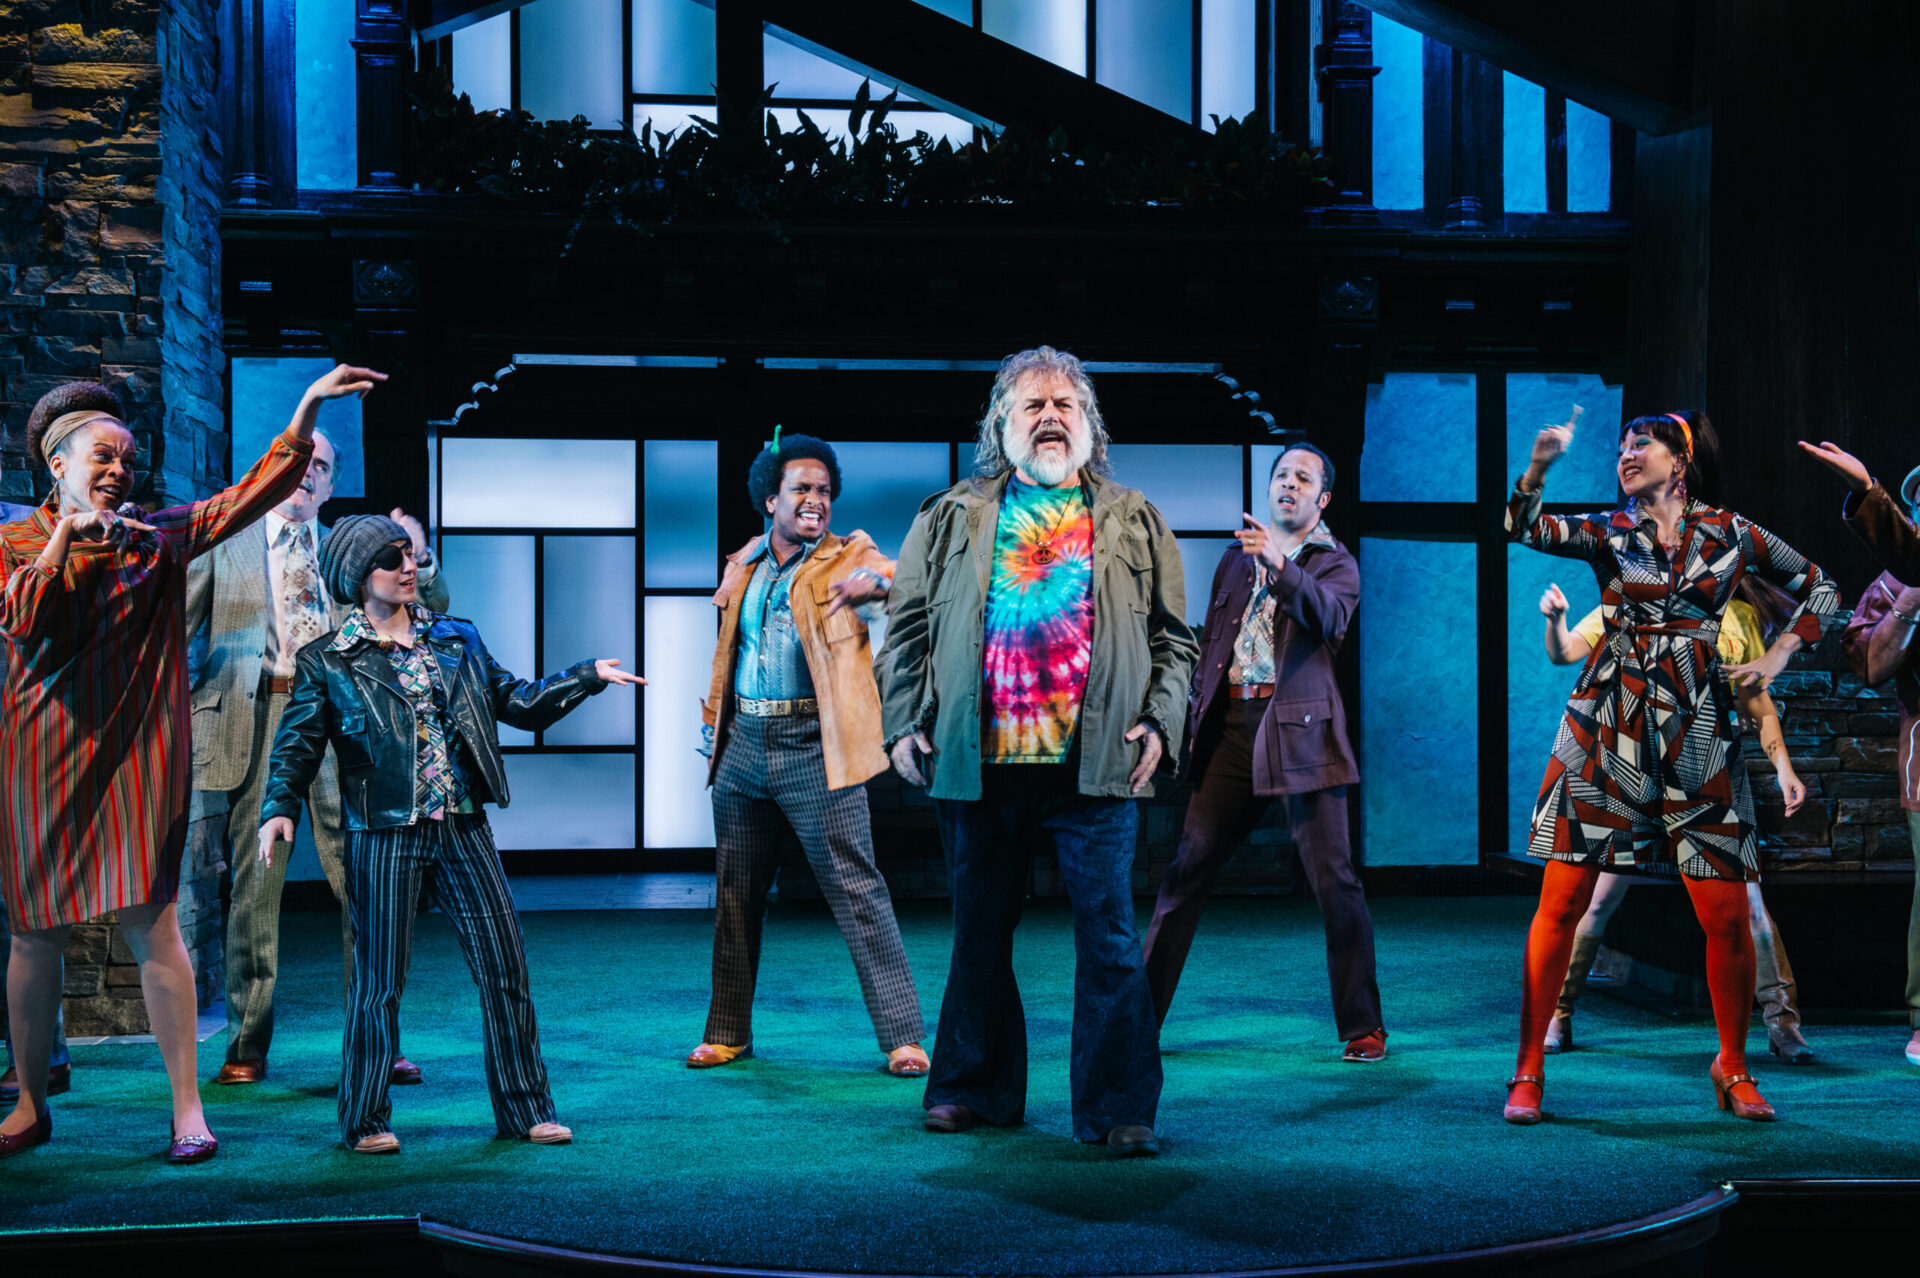 The cast of Folger Theatre’s The Merry Wives of Windsor in song, 1970s-style. On stage January 14 – March 1, 2020. Photo by Cameron Whitman Photography